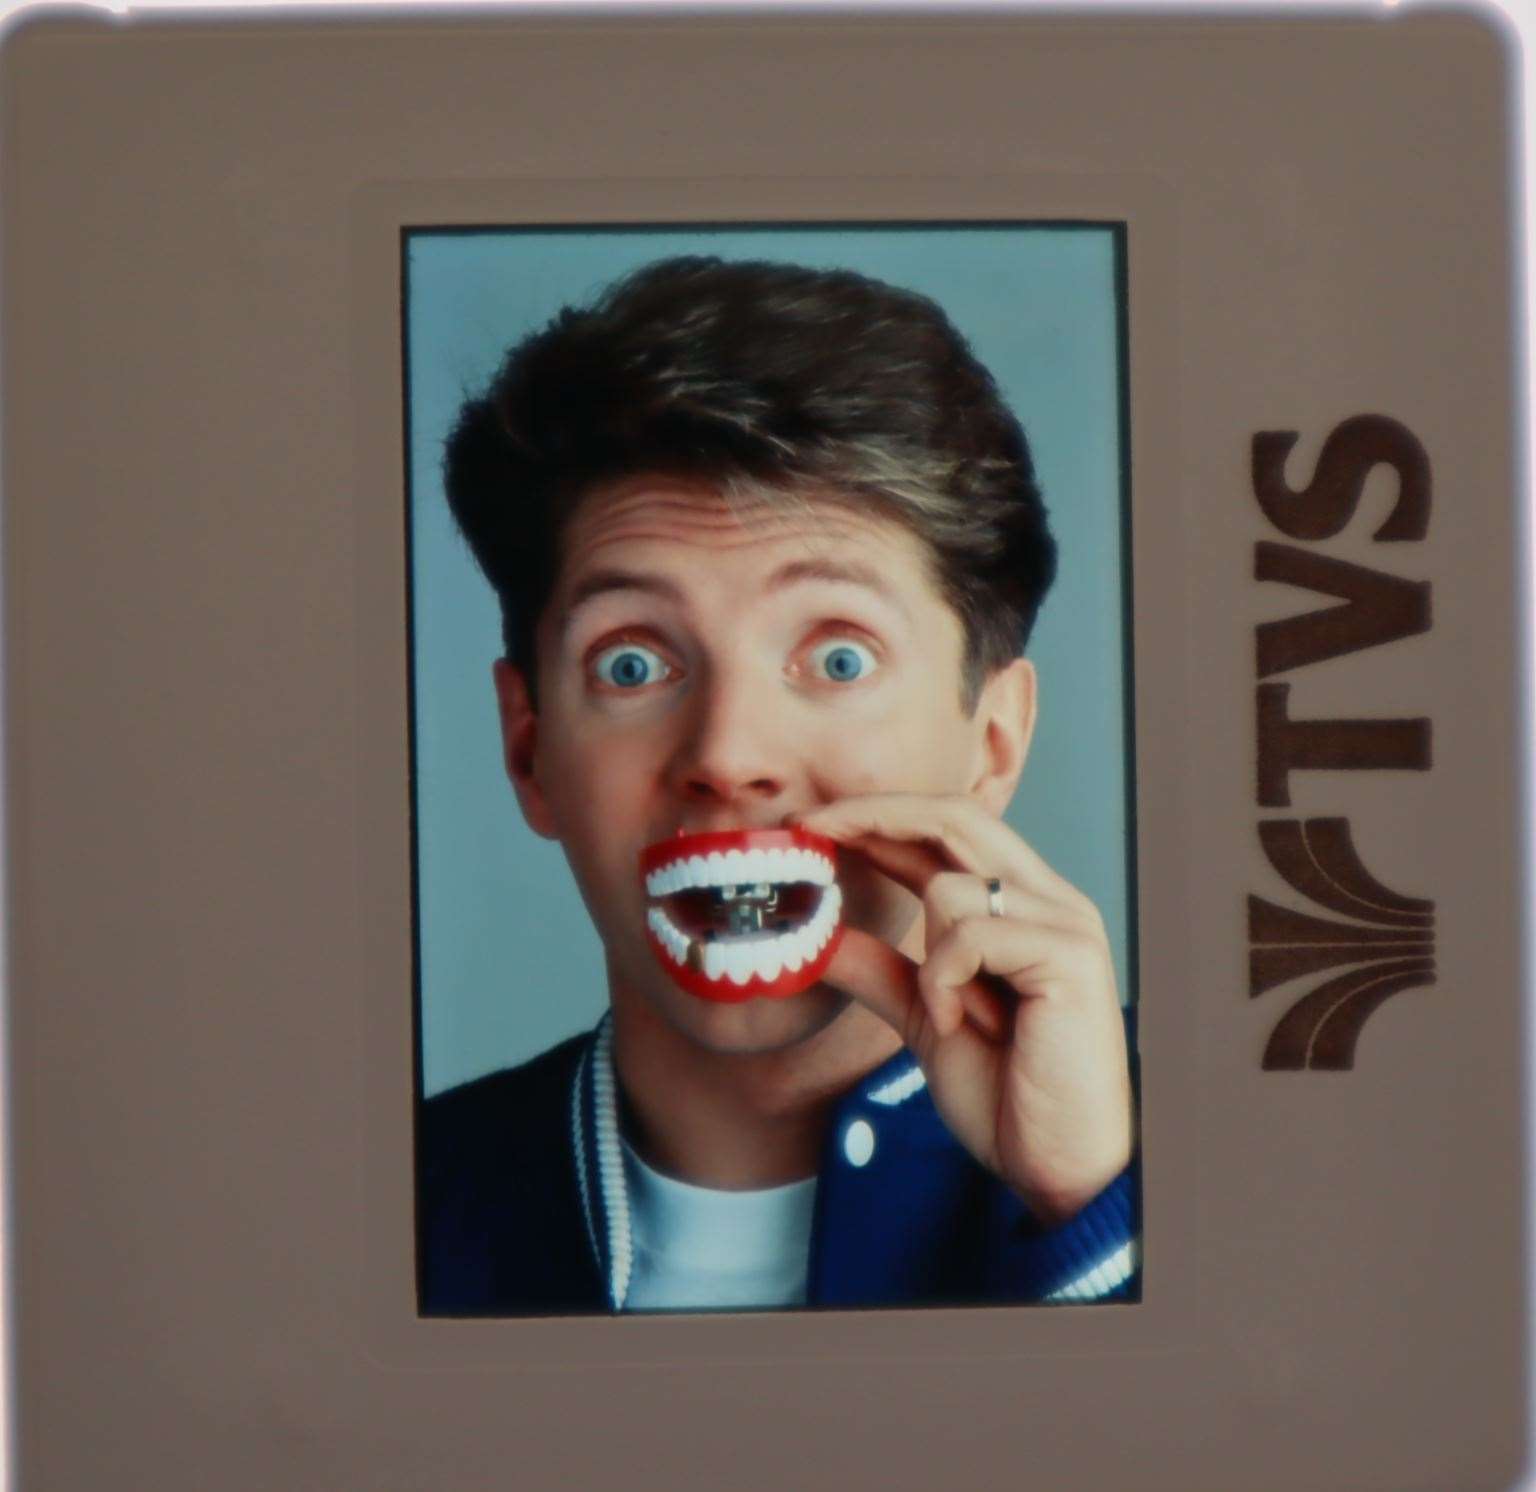 After No.73 was axed, Neil Buchanan went onto present Motormouth, also made at the TVS studios in Maidstone